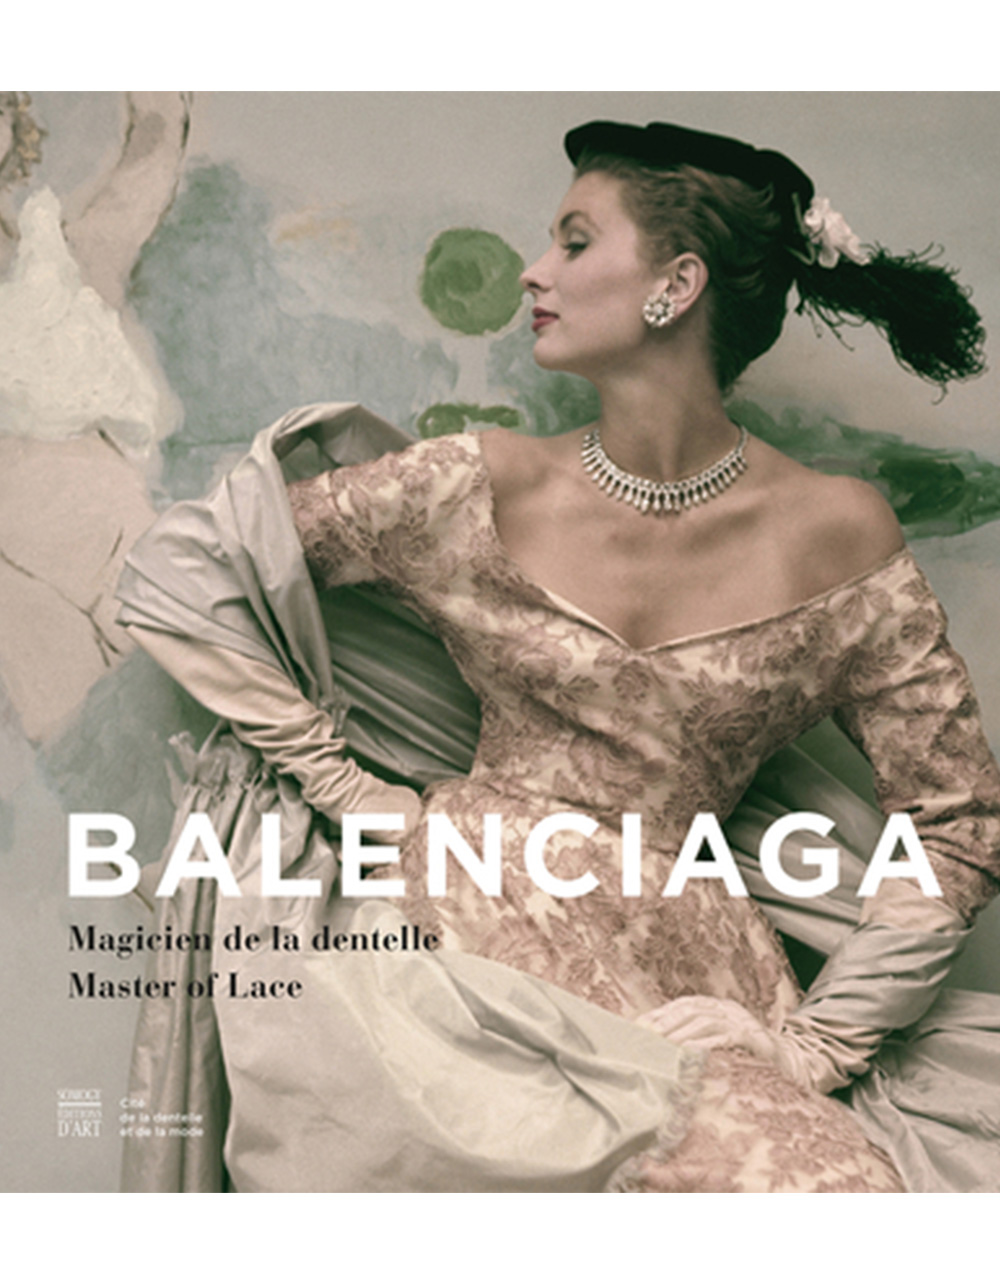 Balenciaga: Master of Lace, by Catherine Join-Diéterle. A history of the use of lace by the great Spanish fashion designer.